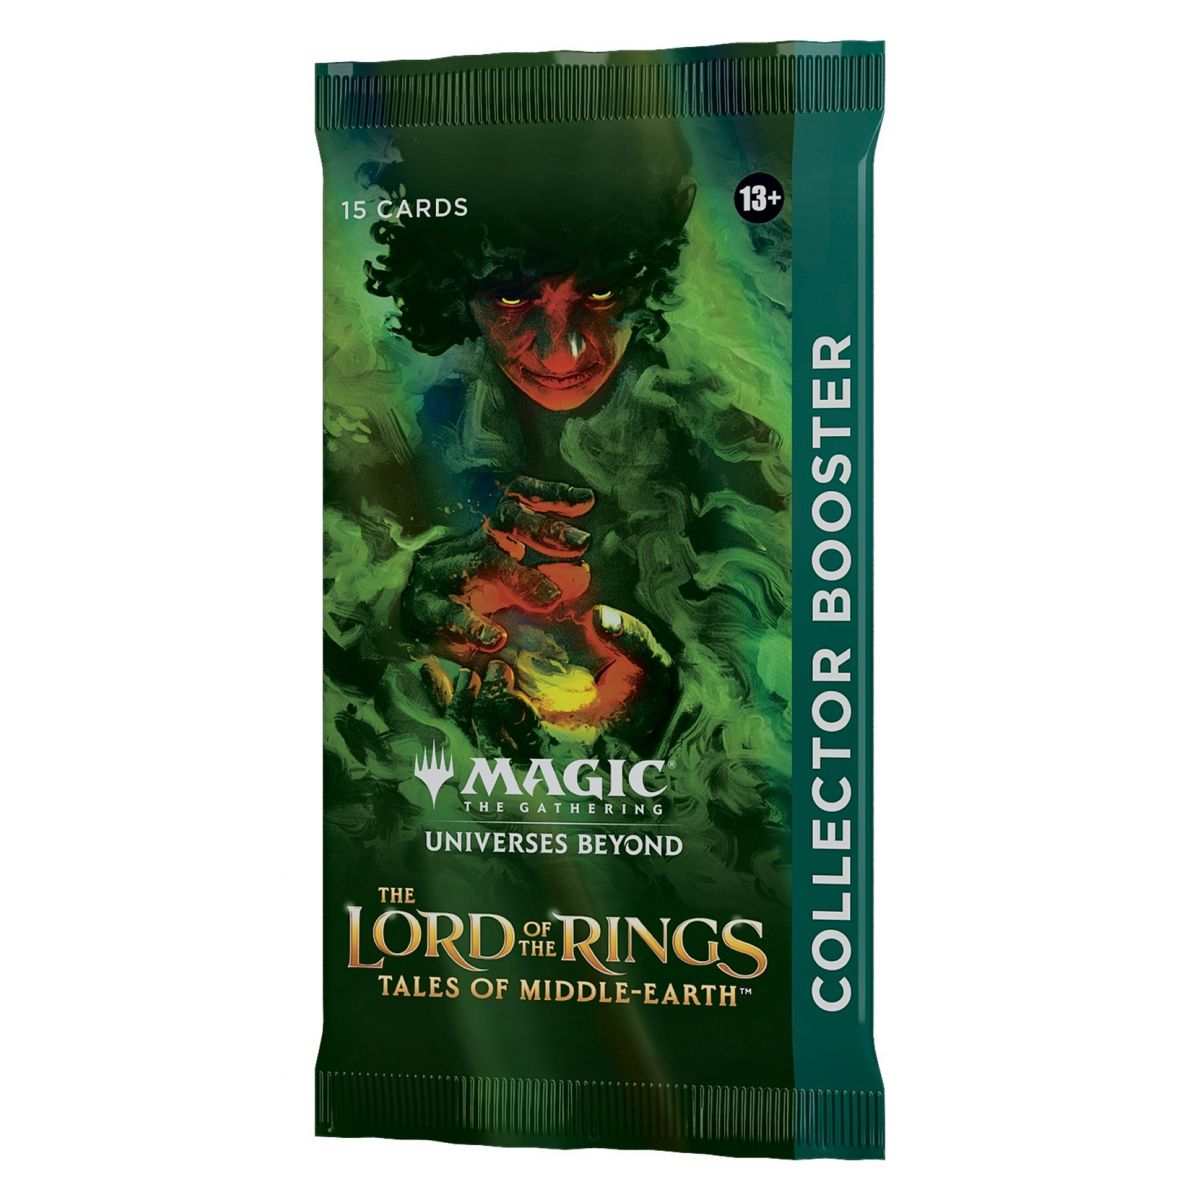 Magic The Gathering - Booster Box - Collector - The Lord of the Rings: Chronicles of Middle-earth - EN